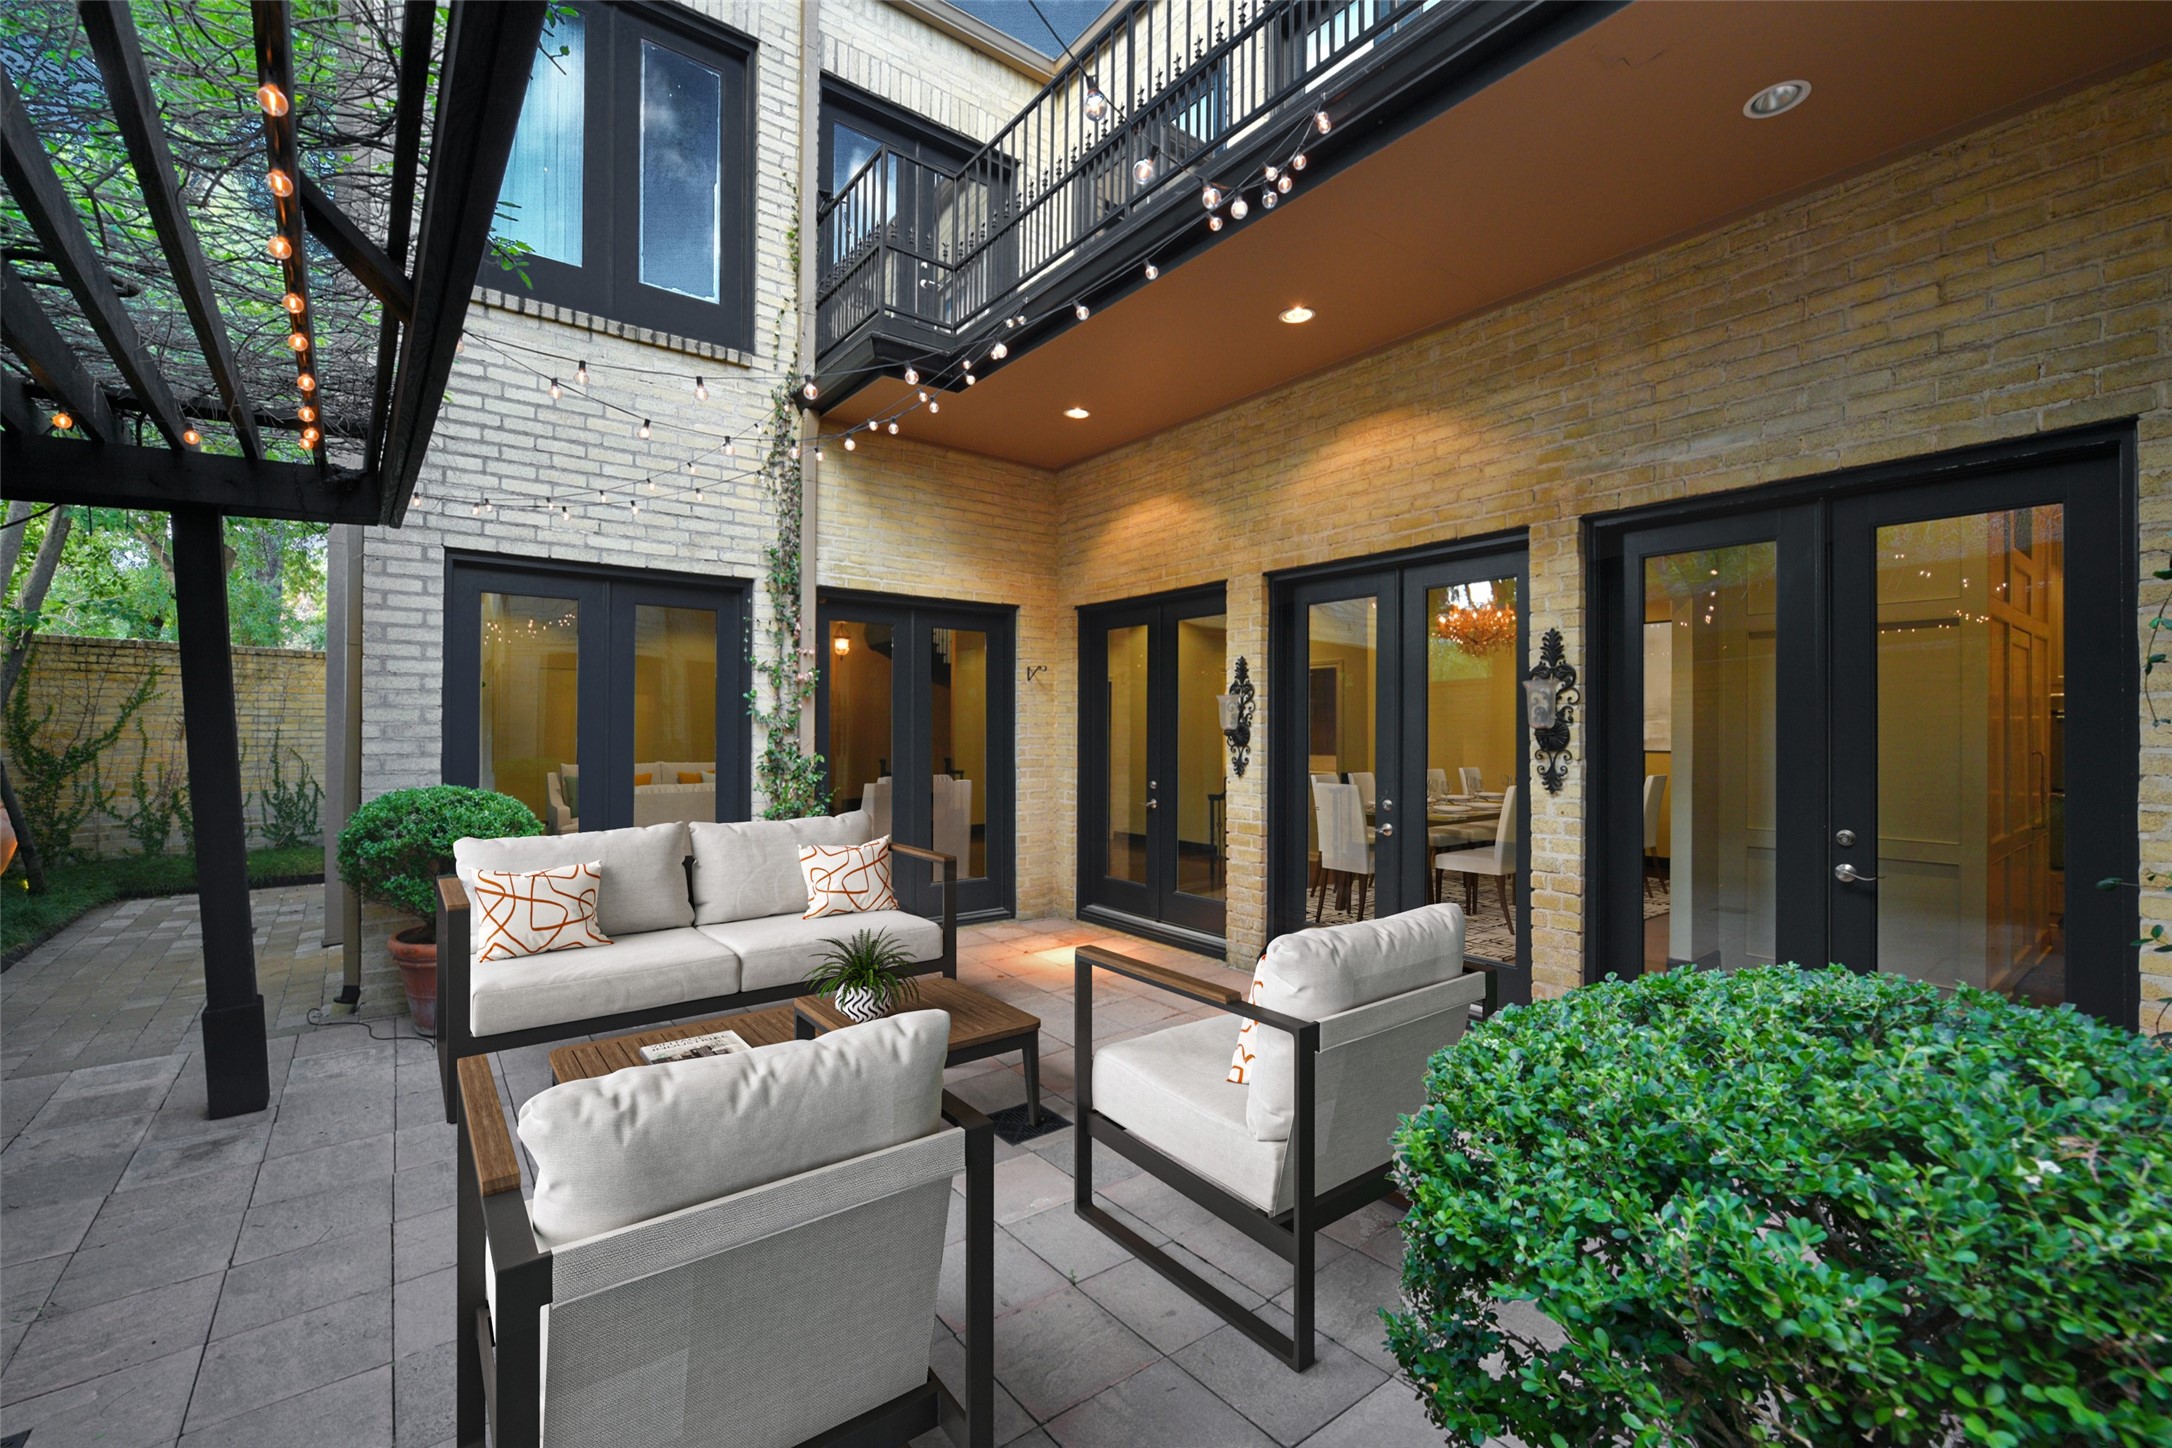 The easy access in and out of the home to the courtyard allows guests to mingle effortlessly. The second floor balcony overlooks the courtyard.